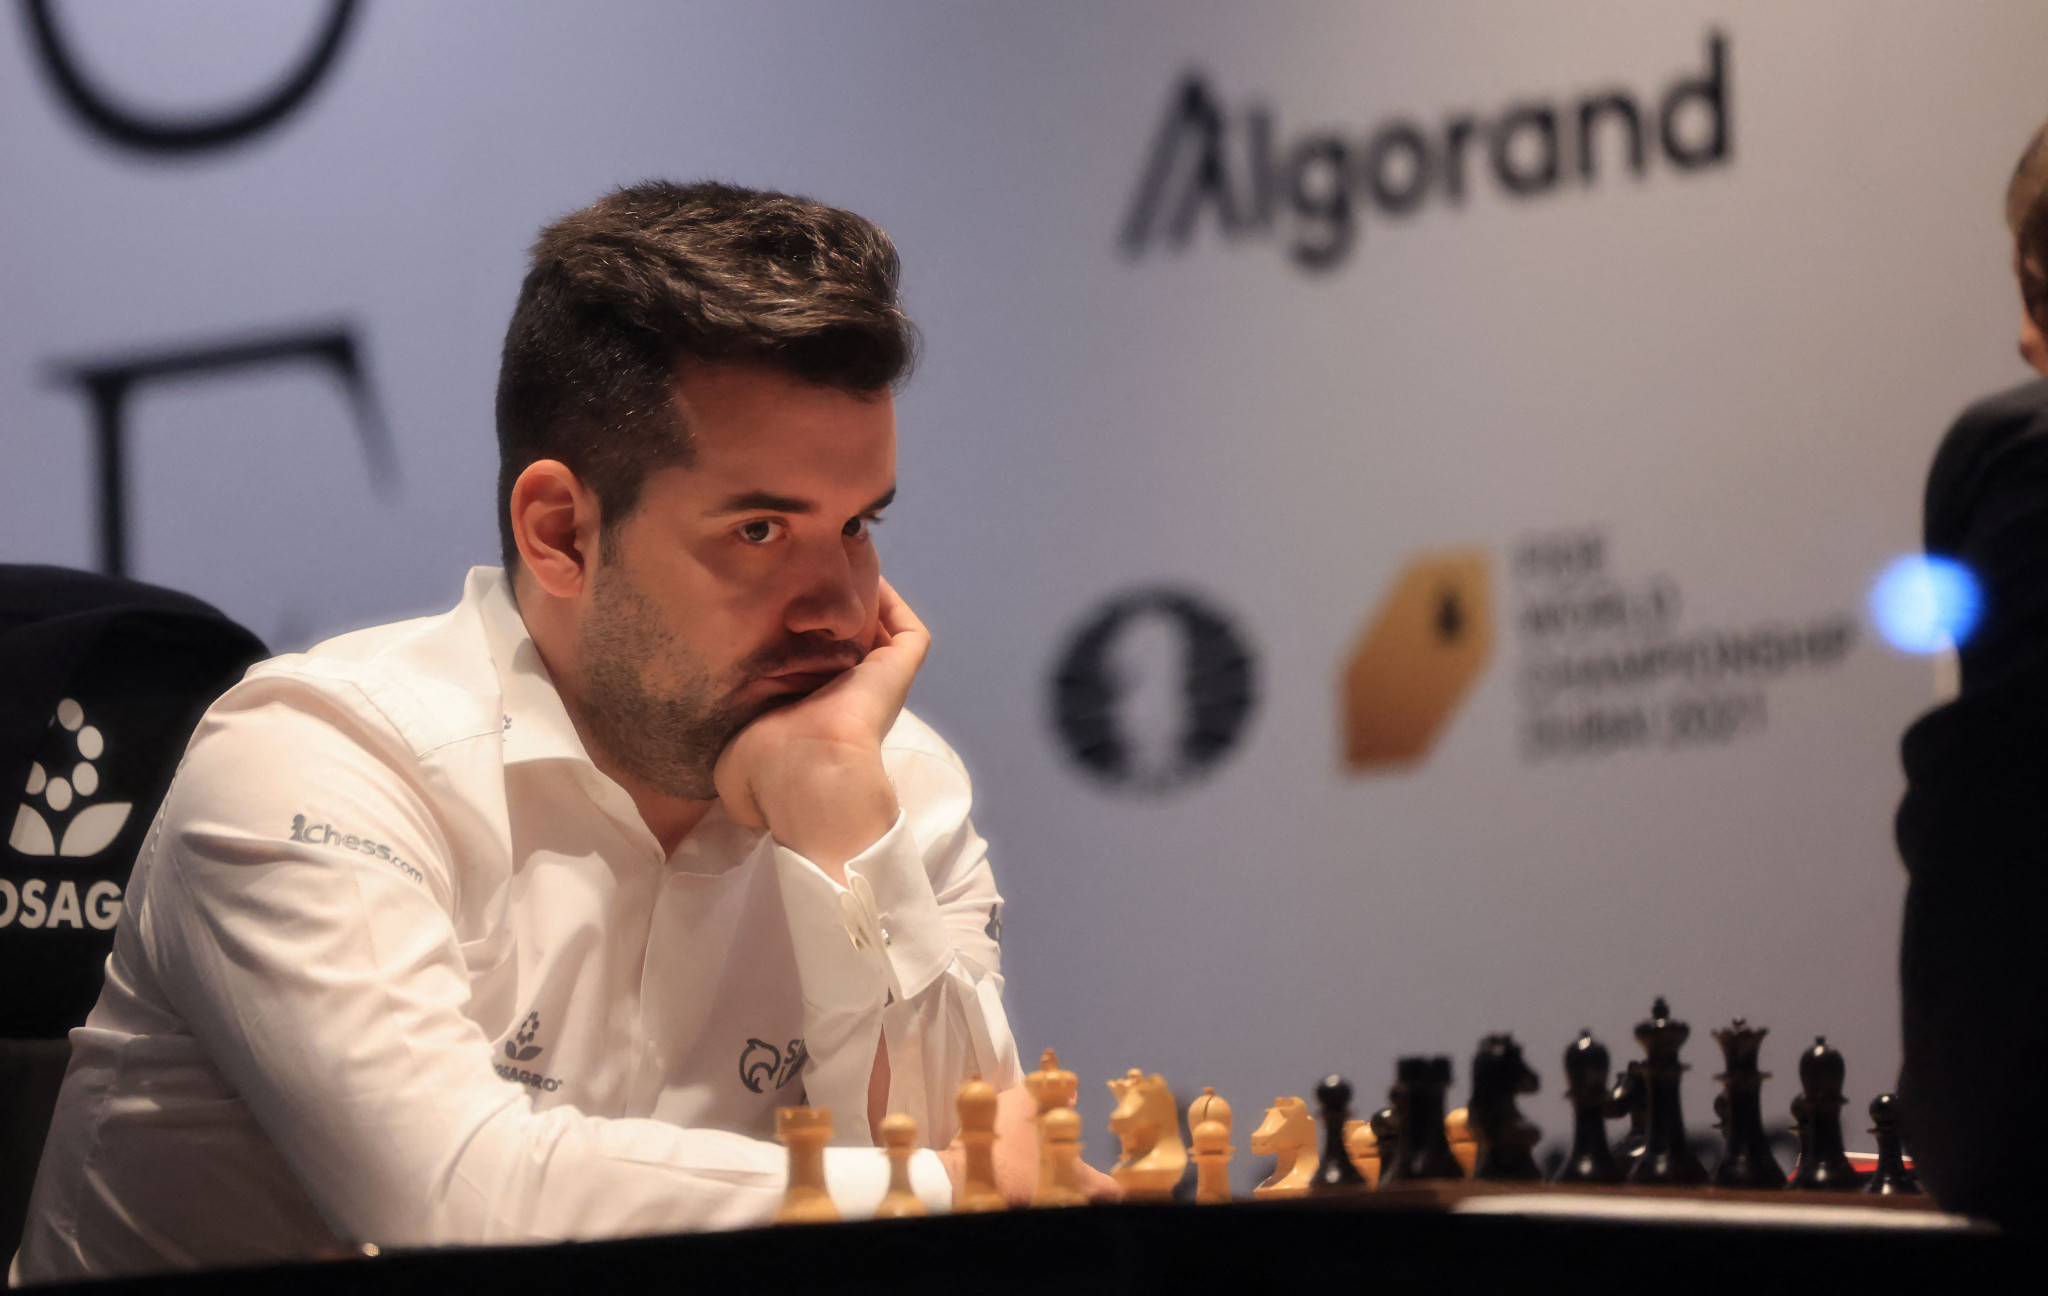 Per FIDE, Ian Nepomniachtchi will be unable to play Magnus Carlsen under  the Russian flag in November, due to Russia's ban from international  sporting competitions by WADA. : r/chess